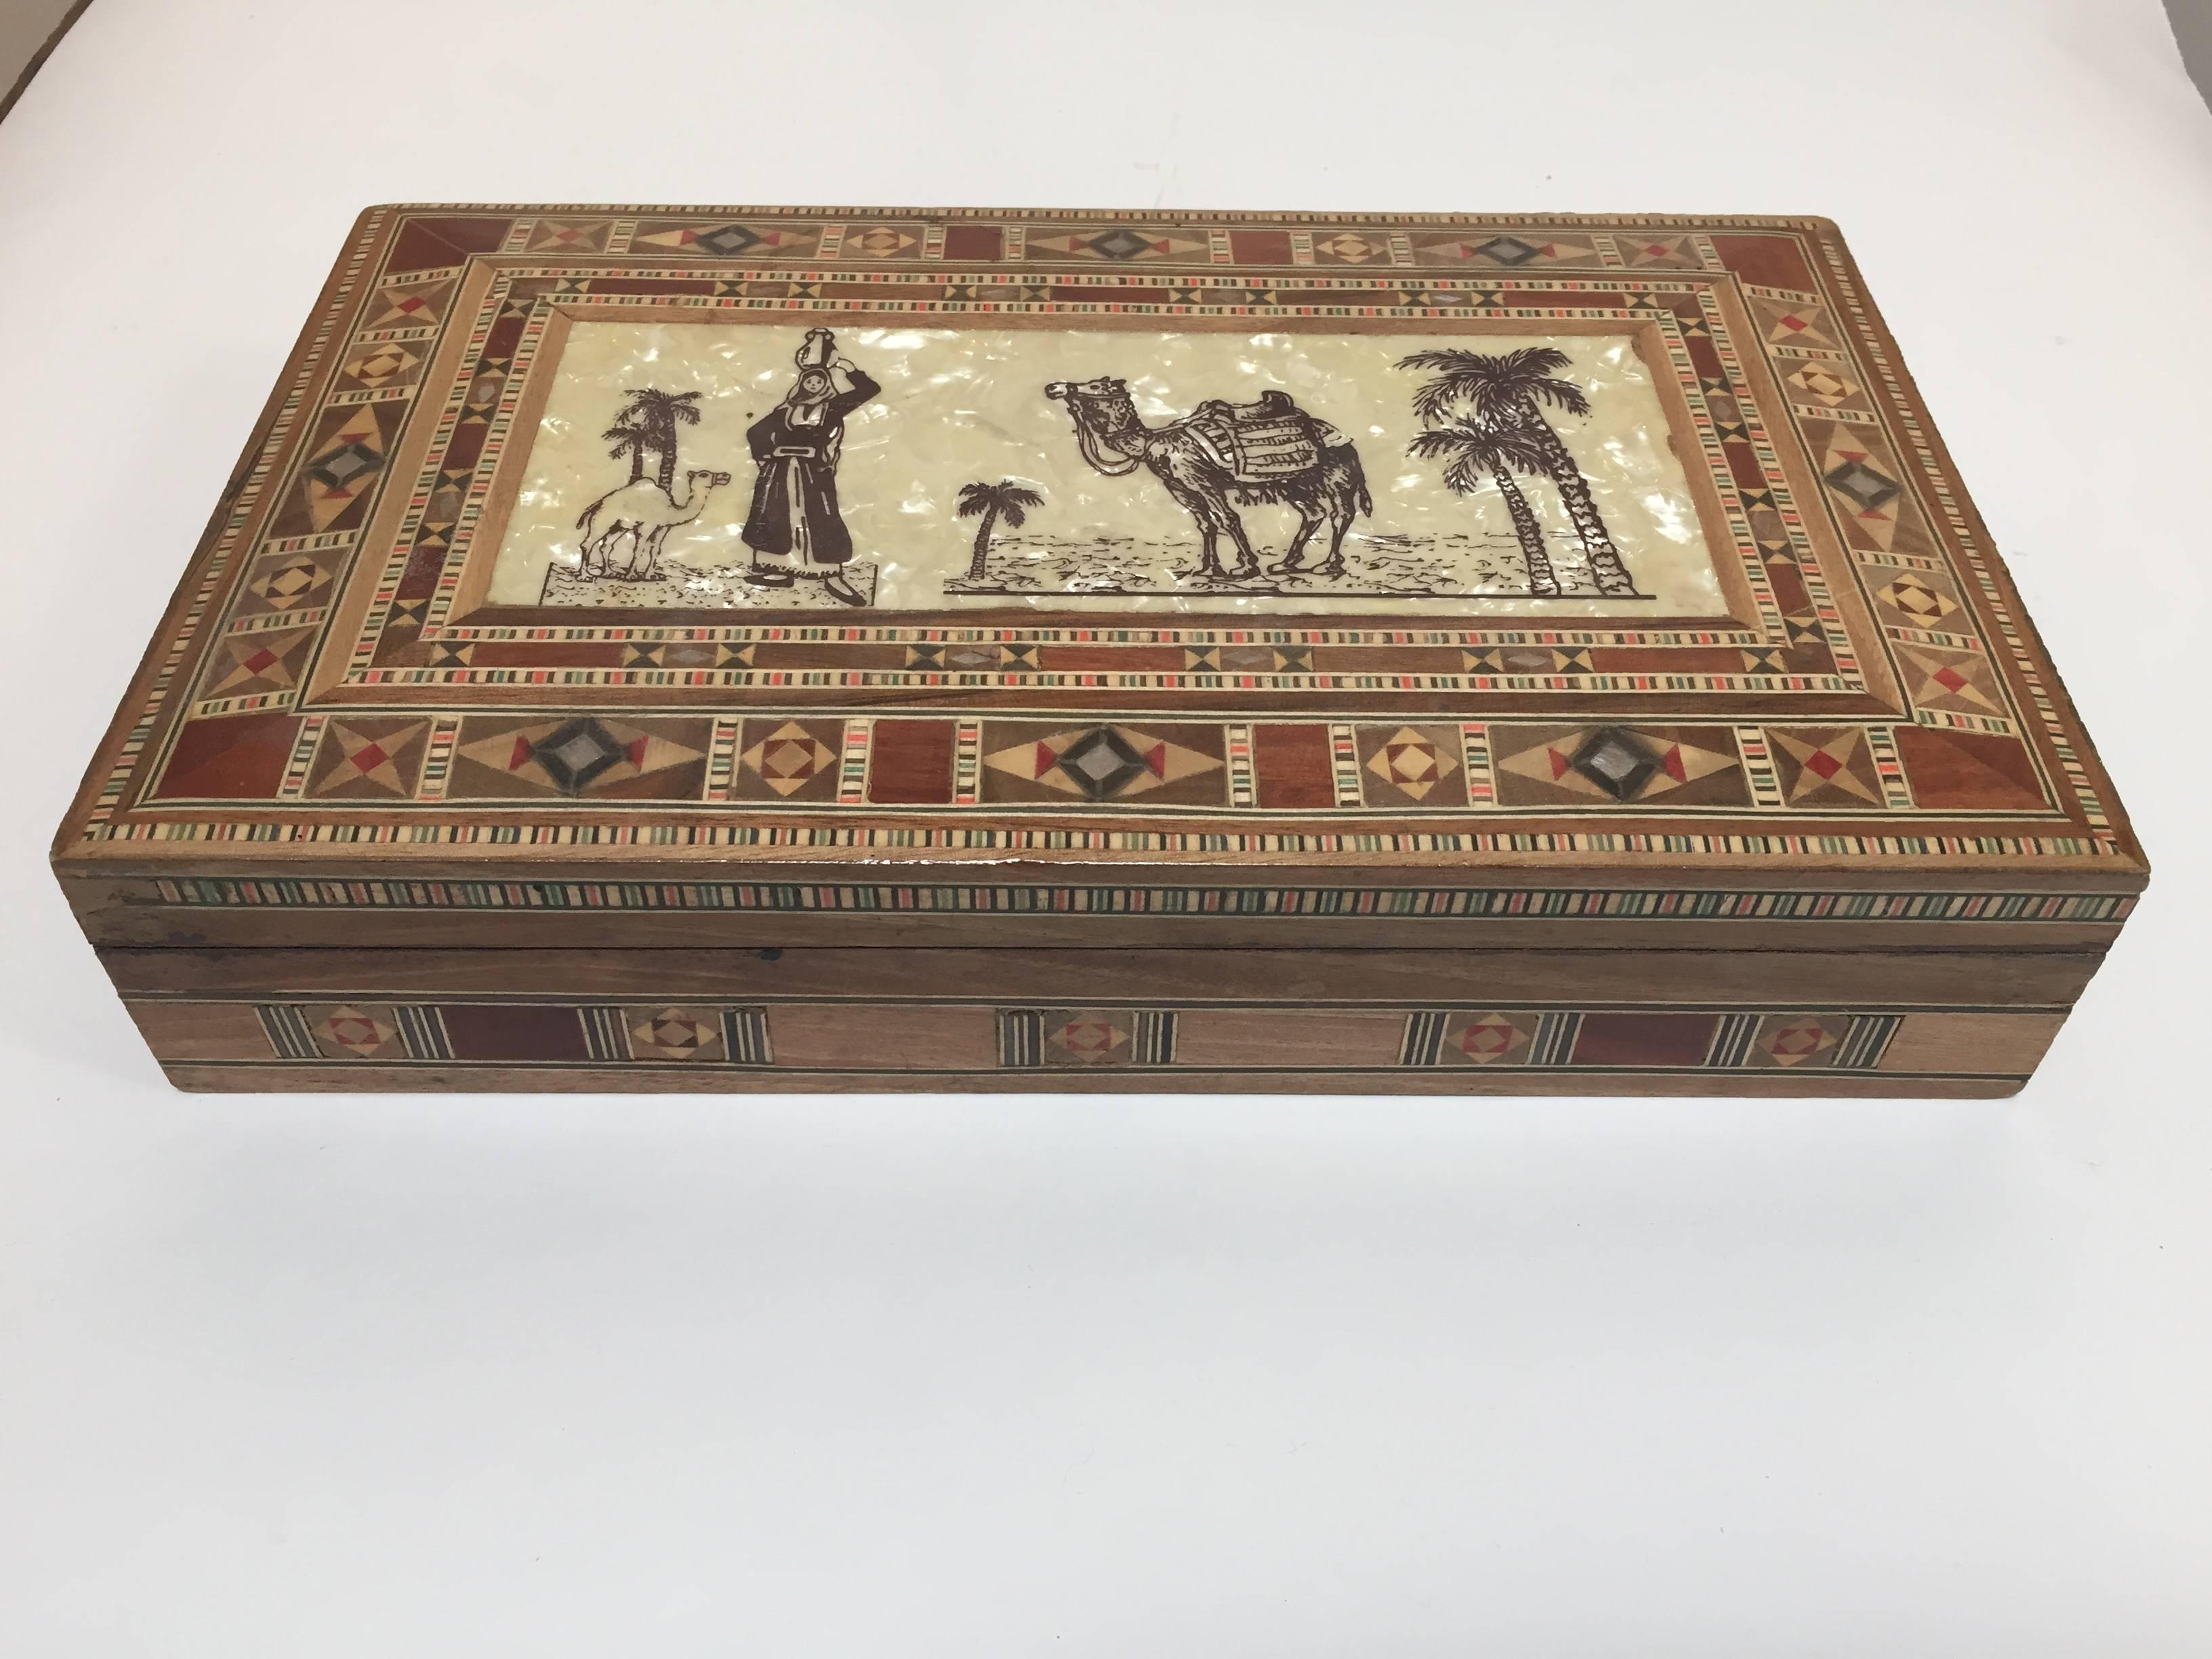 Exquisite handcrafted Middle Eastern Syrian walnut wood jewelry box intricately inlaid with Moorish motif designs which have been painstakingly inlaid mother-of-pearl and marquetry in different fruitwoods and decorated with a desert scenes with a